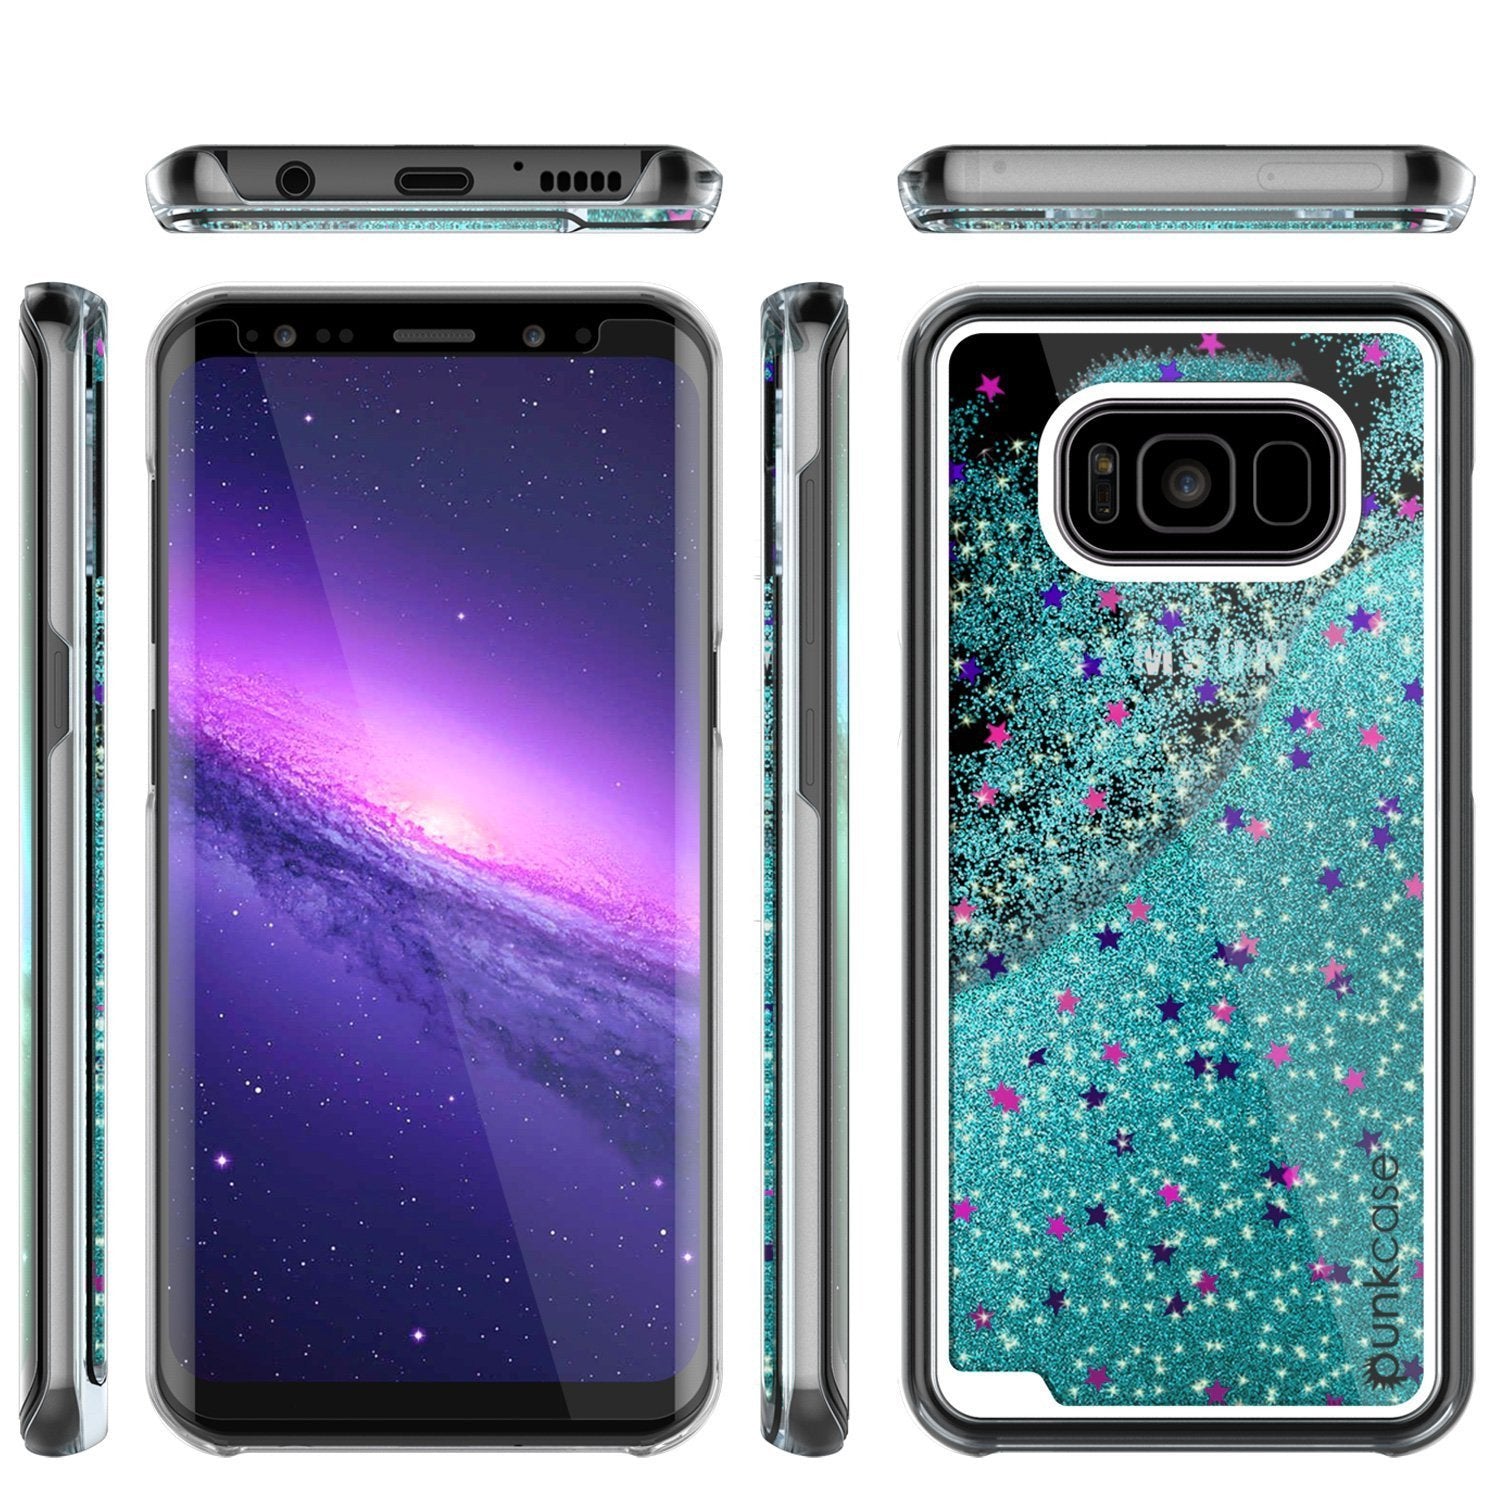 Galaxy S8 Case, Punkcase Liquid Teal Series Protective Dual Layer Floating Glitter Cover